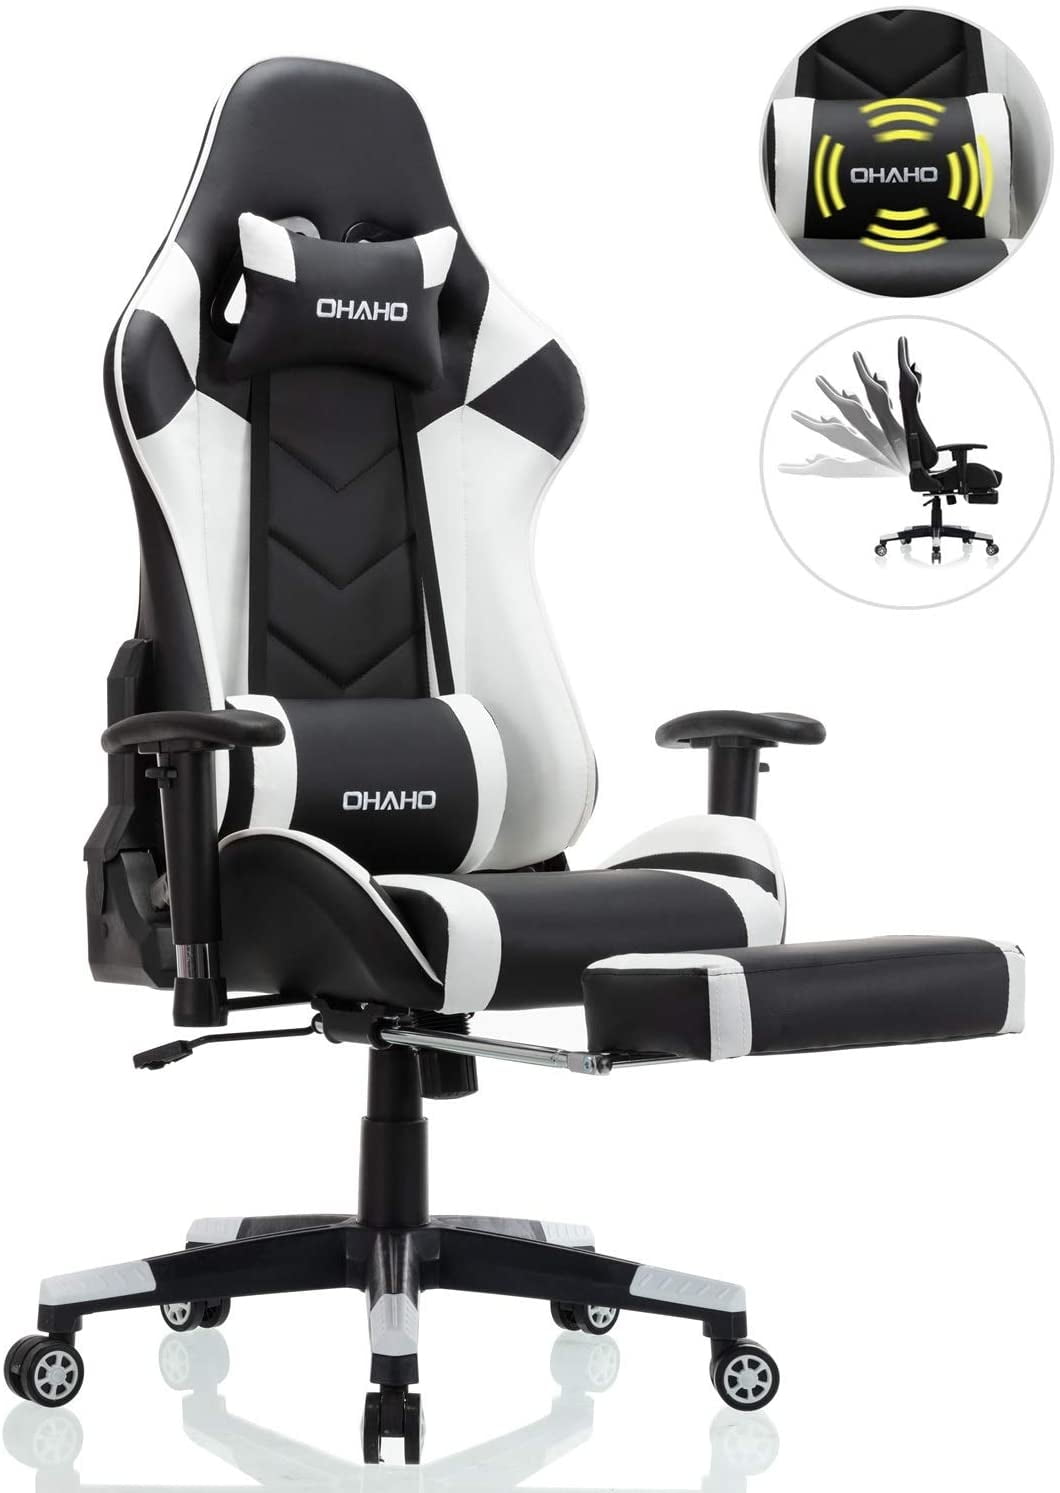 GAMING CHAIR RACING COMPUTER LEATHER HIGH BACK RECLINER OFFICE DESK SWIVEL SEAT